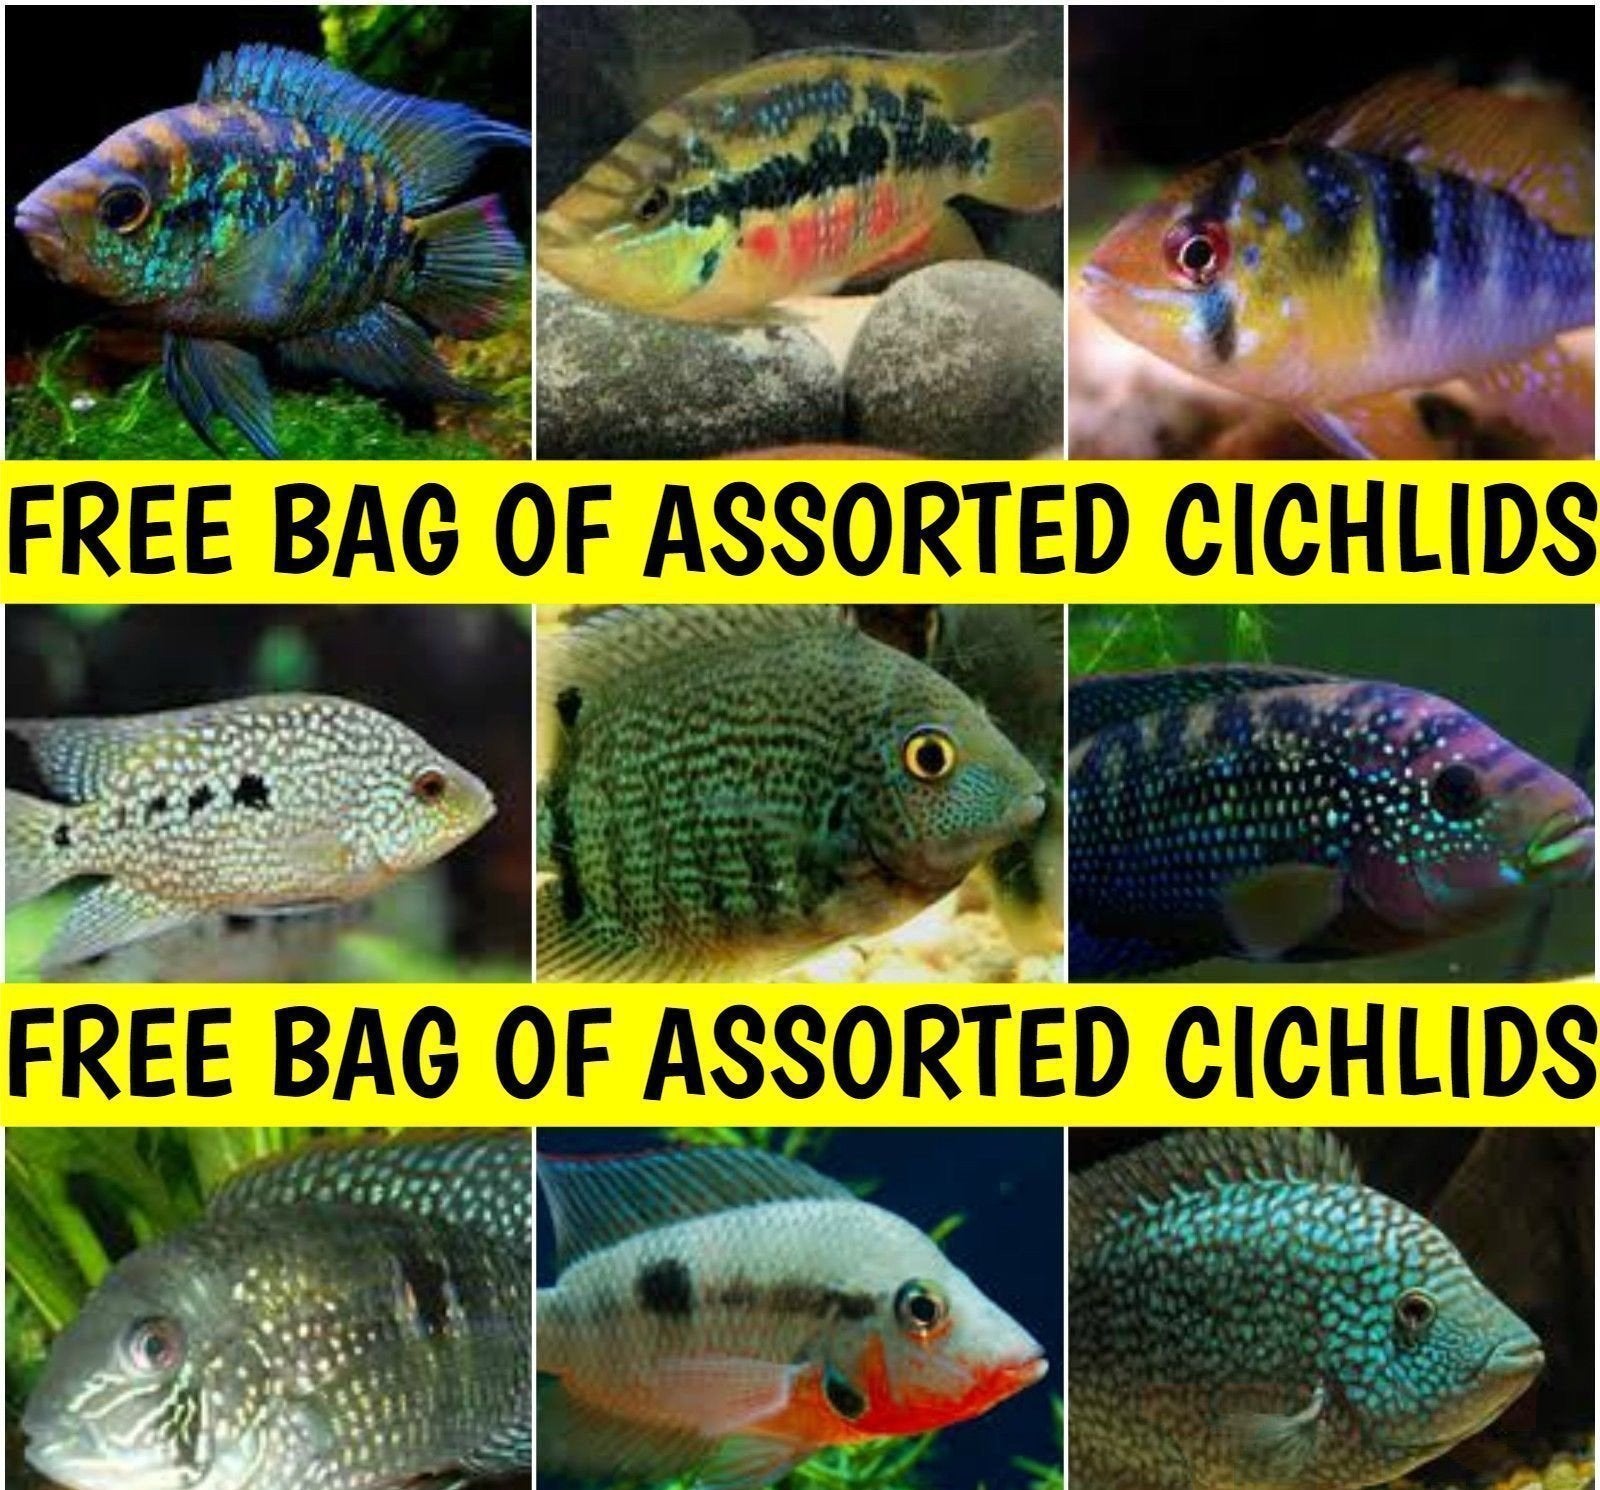 X8 Assorted Free South American Cichlids Live *Share And Receive Free*-SHARE_FREE-www.YourFishStore.com